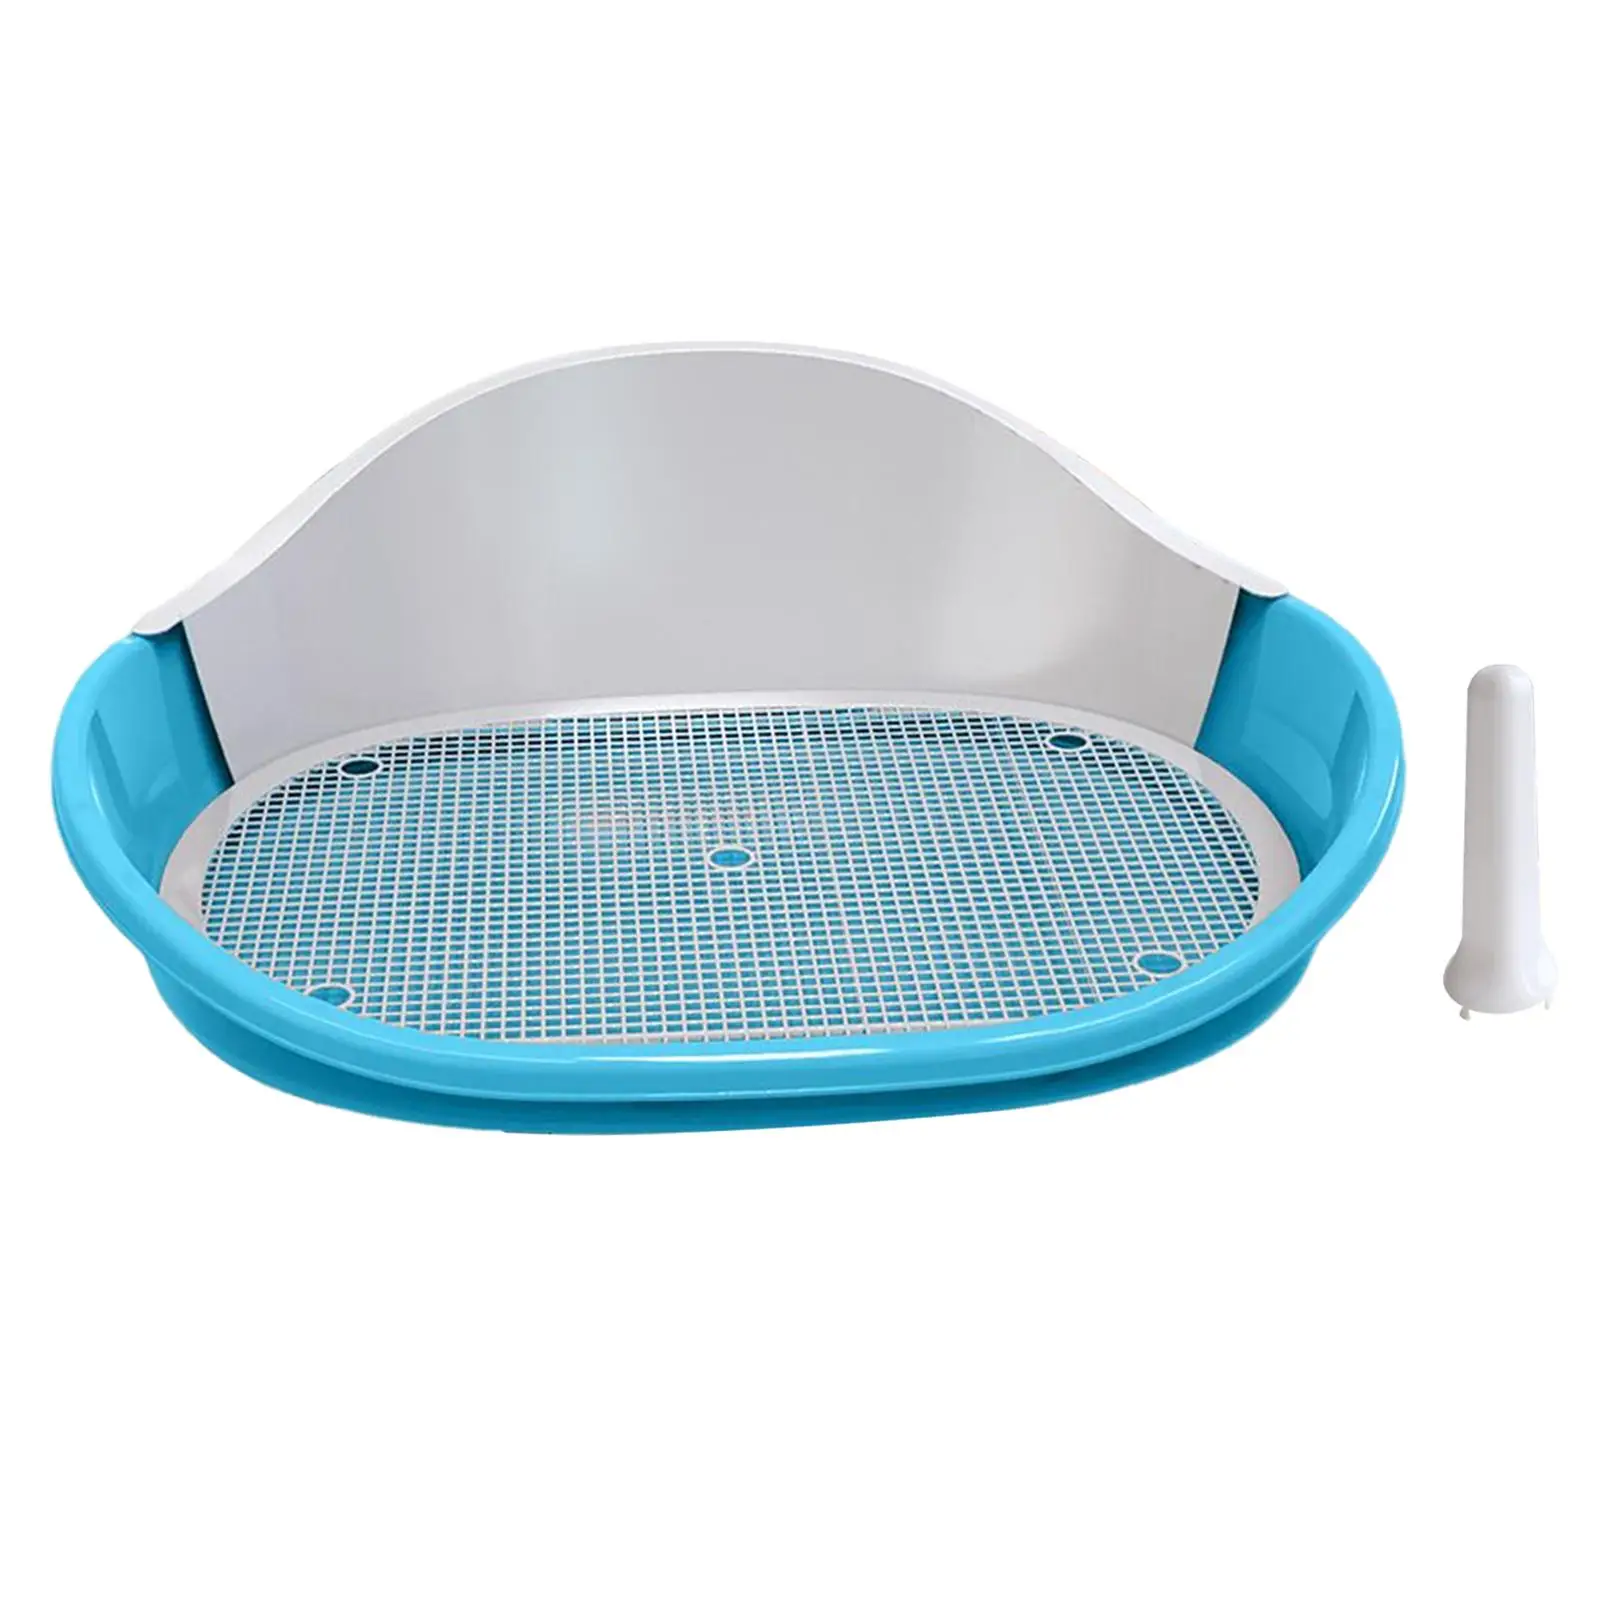 Indoor Dog Toilet Puppy Toilet Dog Litter Tray Puppy Pee Tray Washable Pet Training Toilet Tray for Cats Bunny Accessories